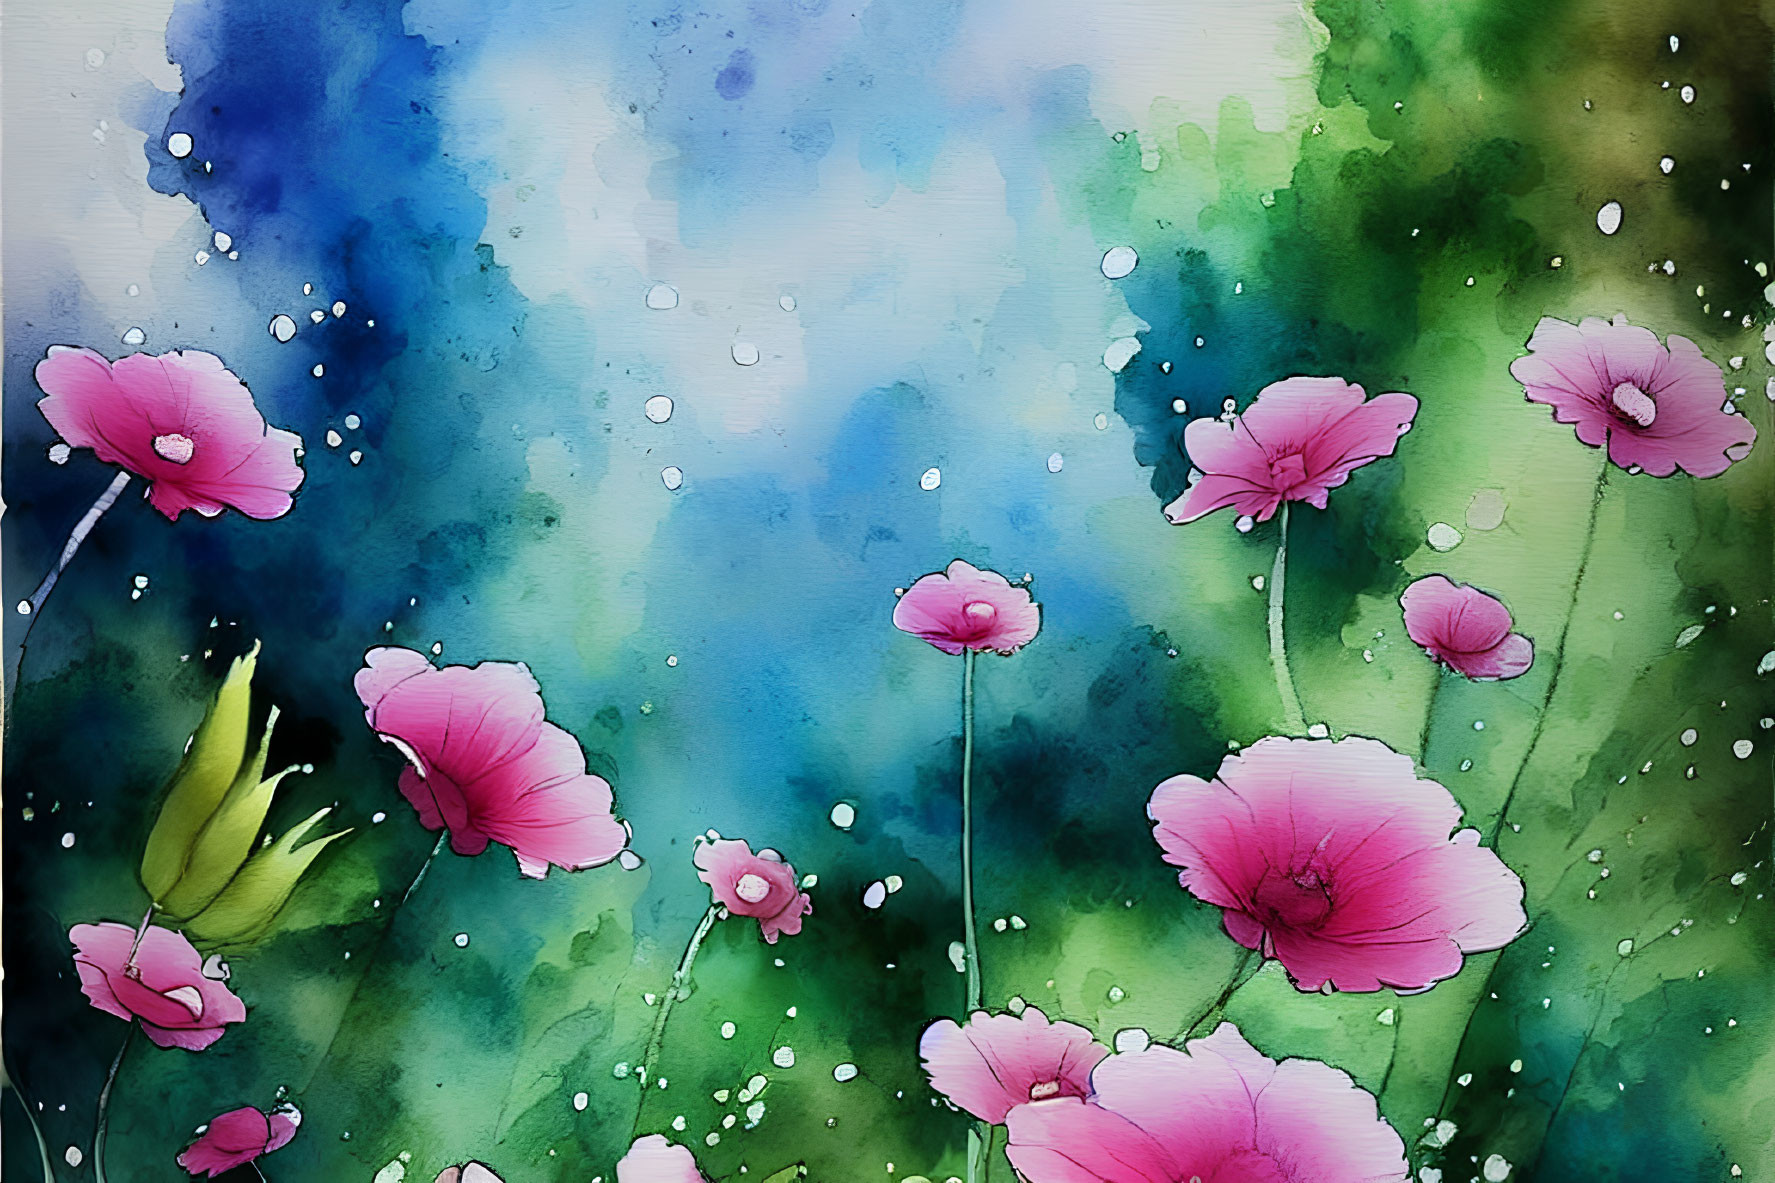 Pink Flowers Watercolor Painting with Blue, Green, and White Blending